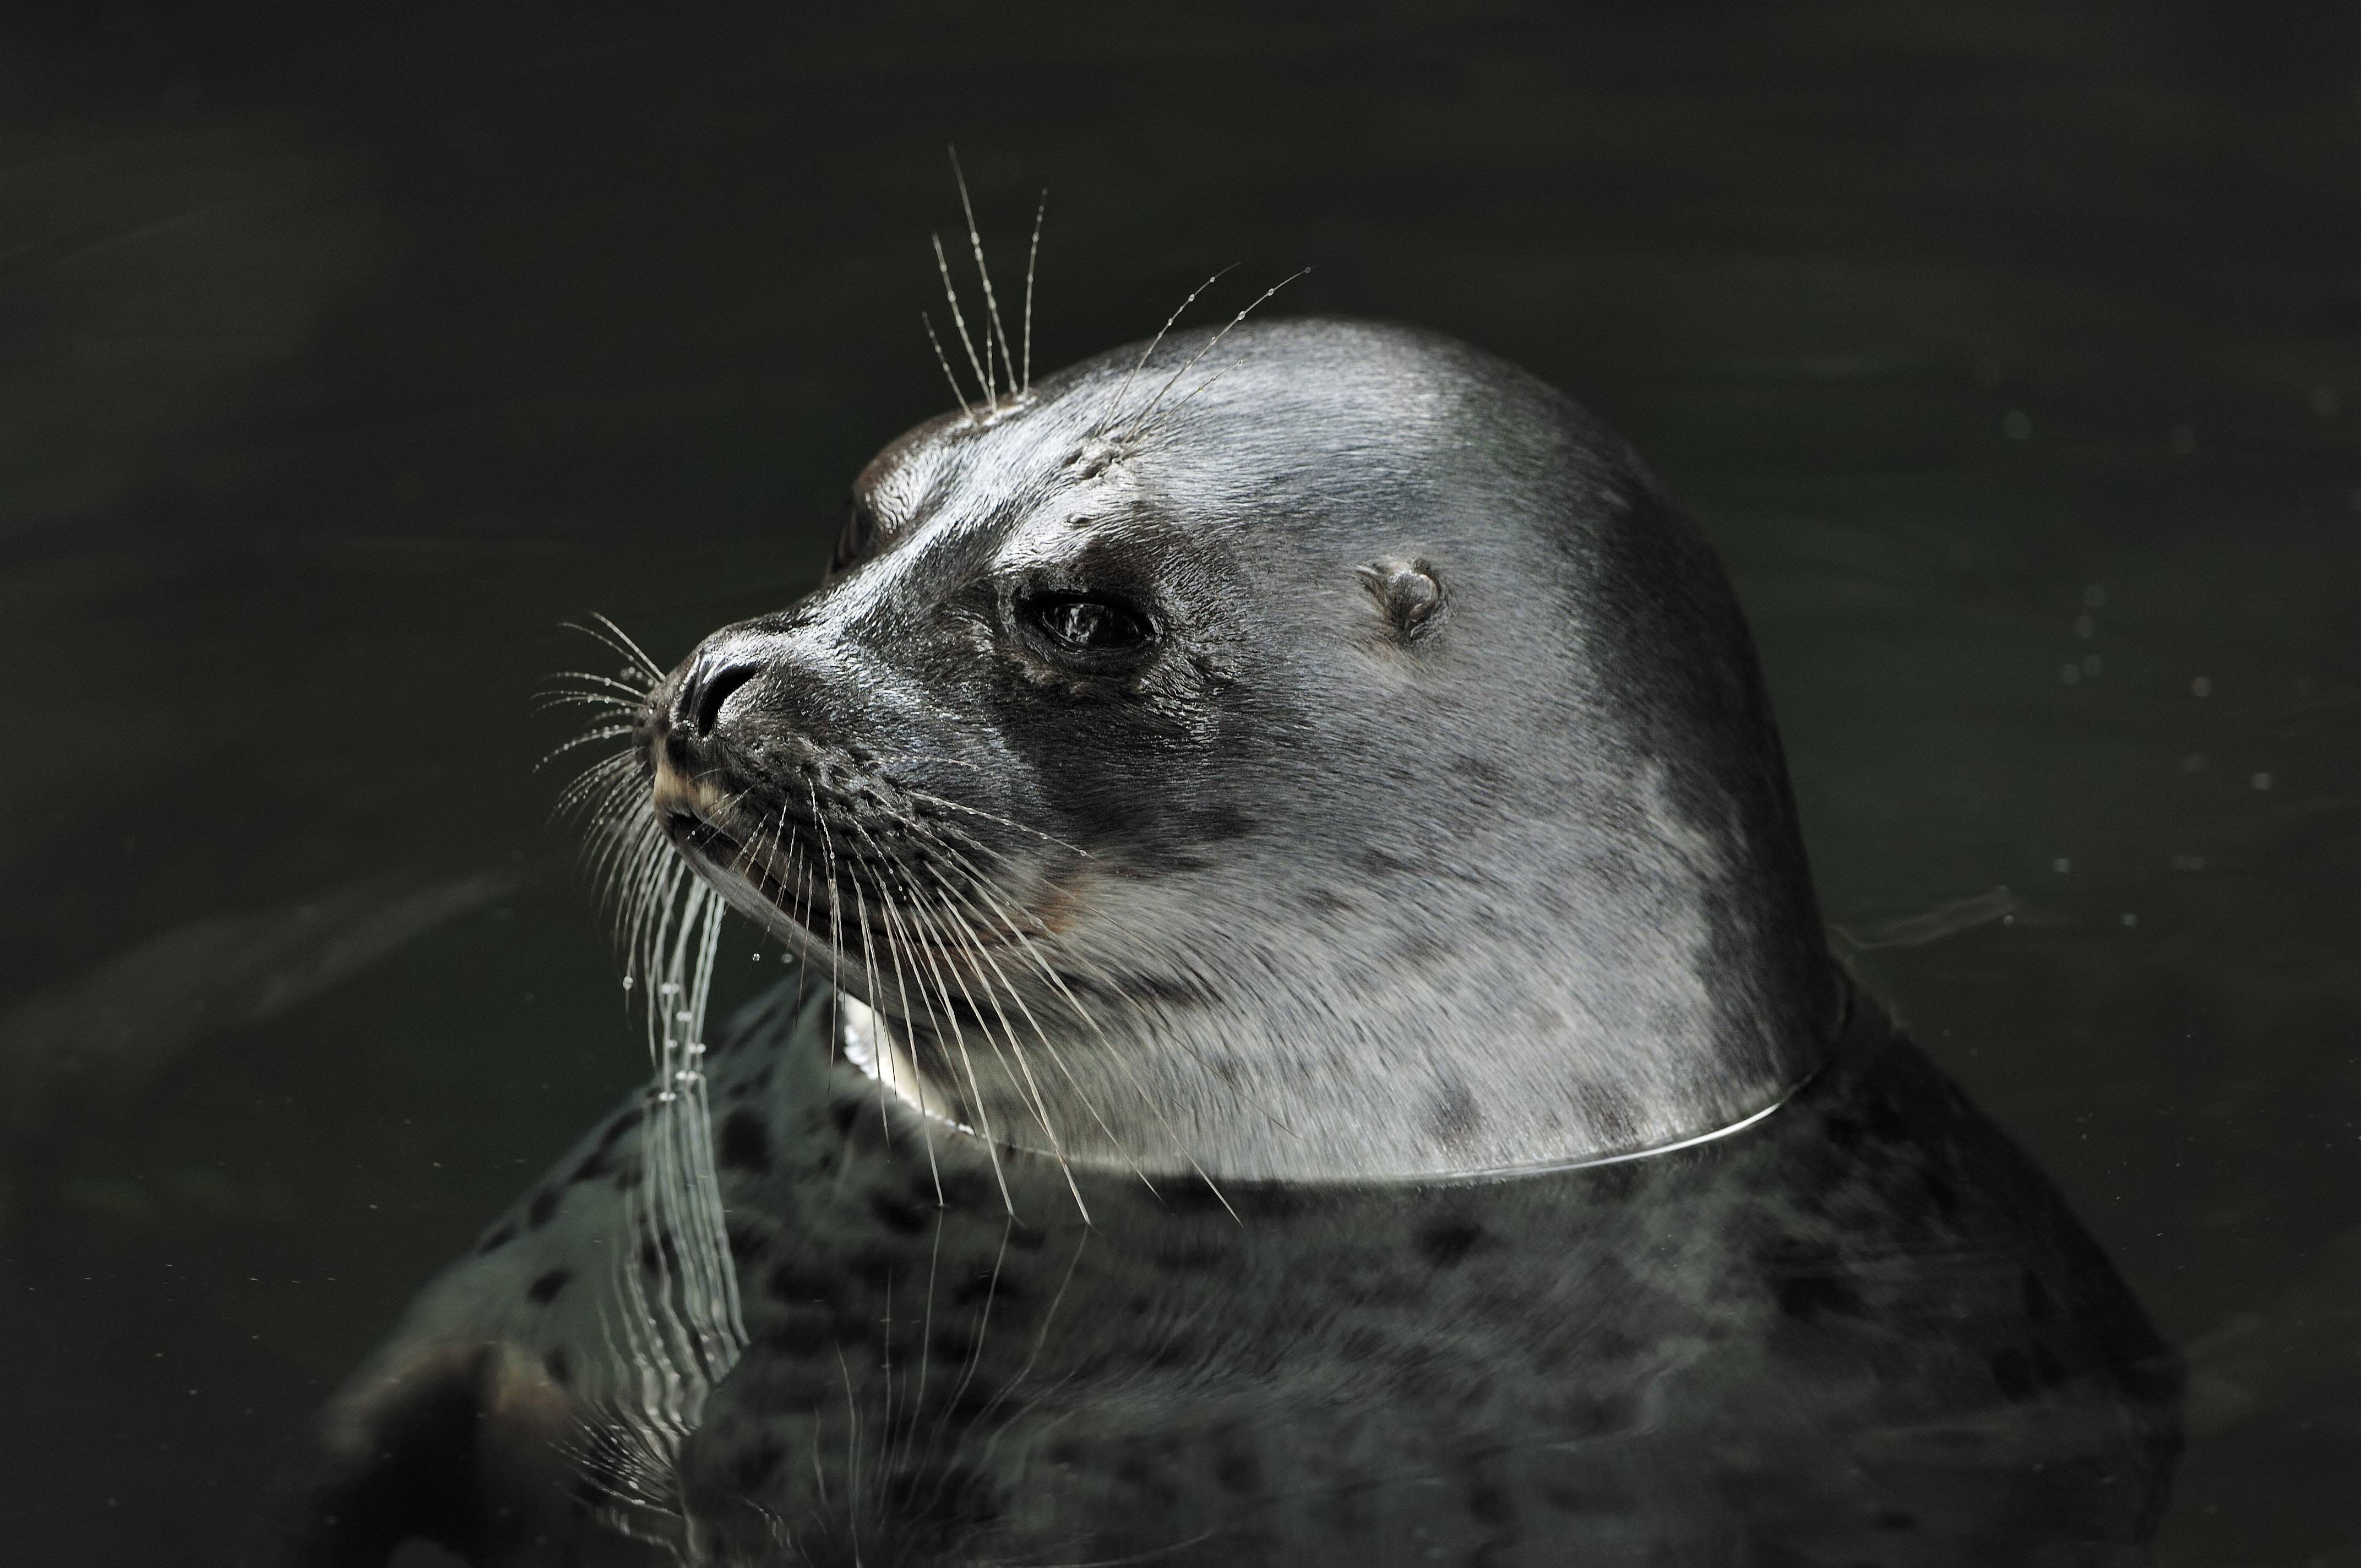 Endangered Baltic ringed seals are featured live on WWF